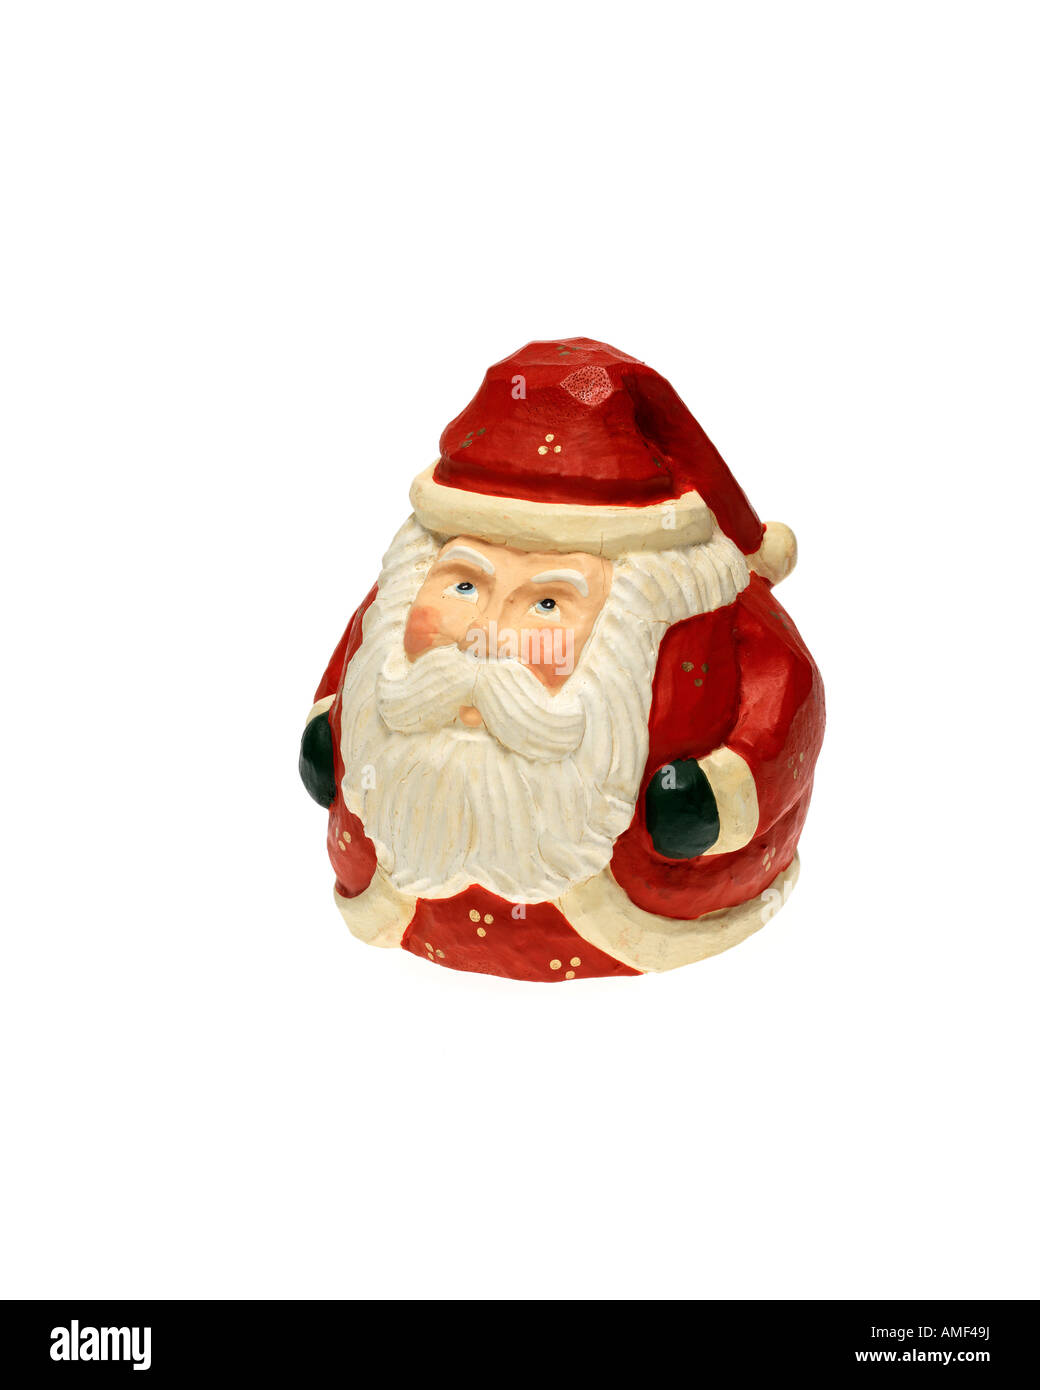 vintage Santa Claus wood carving figurine on white background Stock Photo